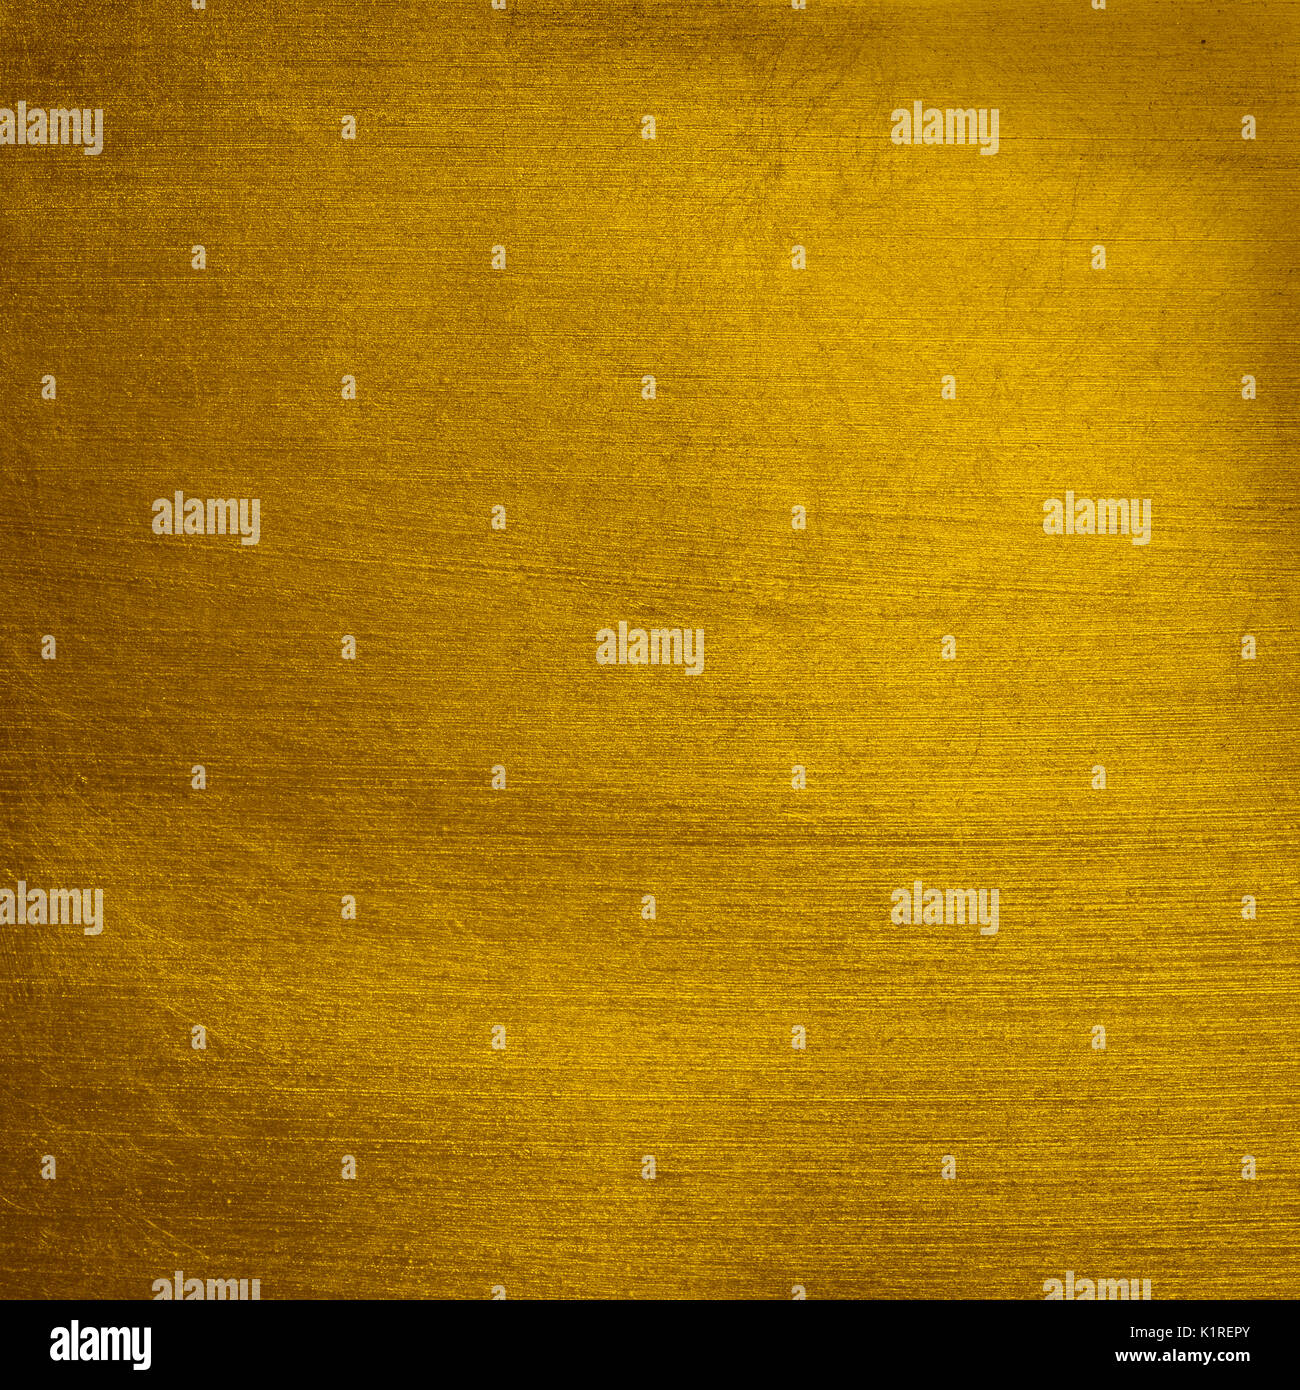 Christmas golden background. Rough stretch and rustic surface. Stock Photo